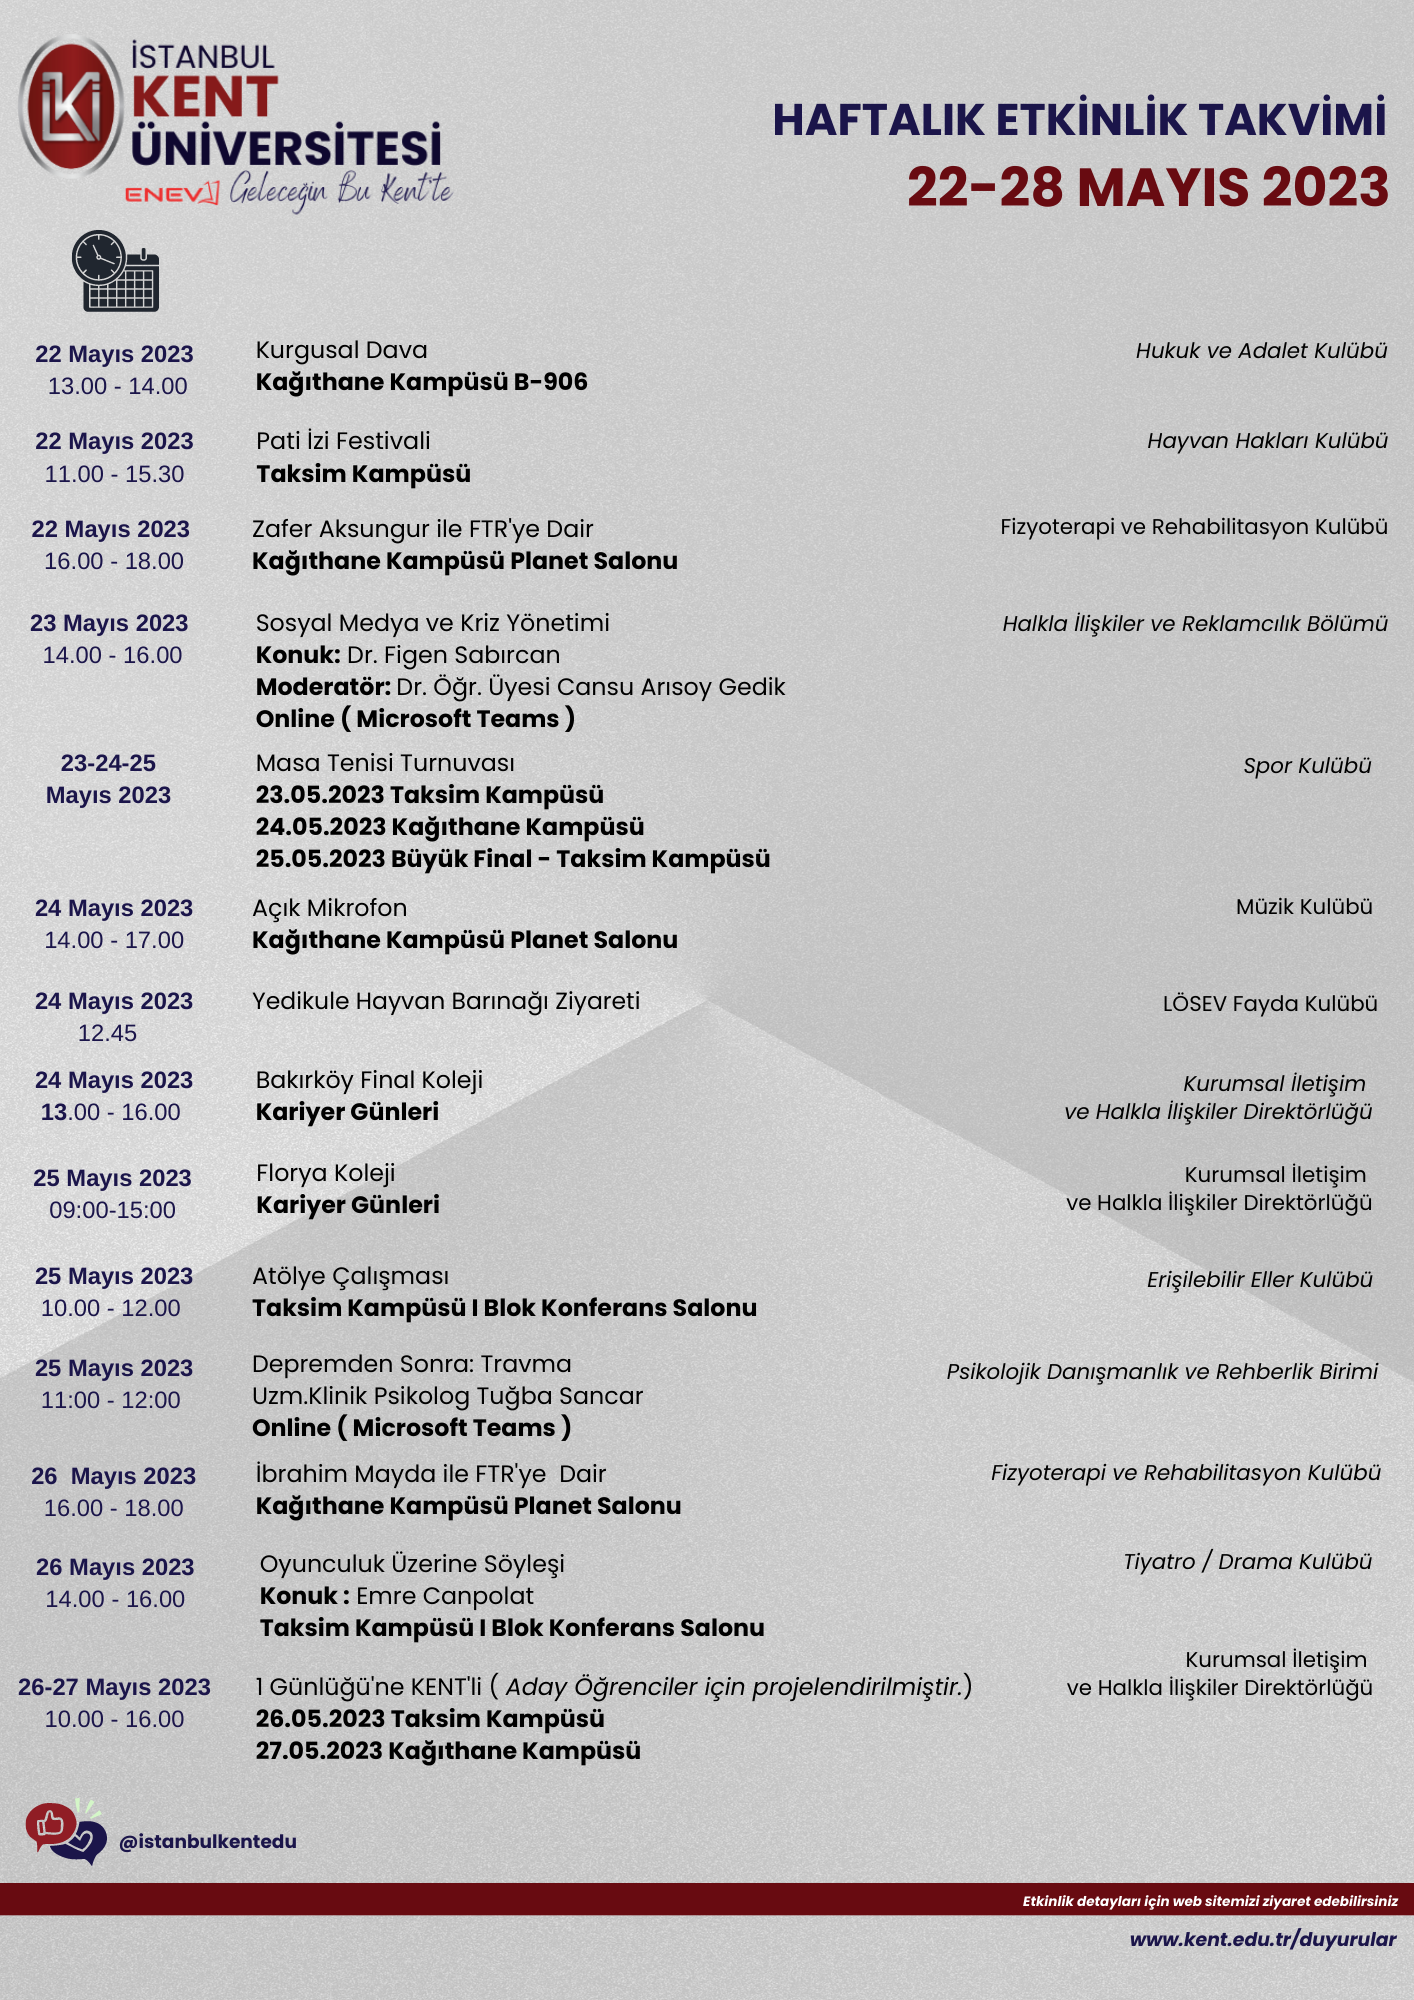 22-28 May 2023 Istanbul KENT University Weekly Events